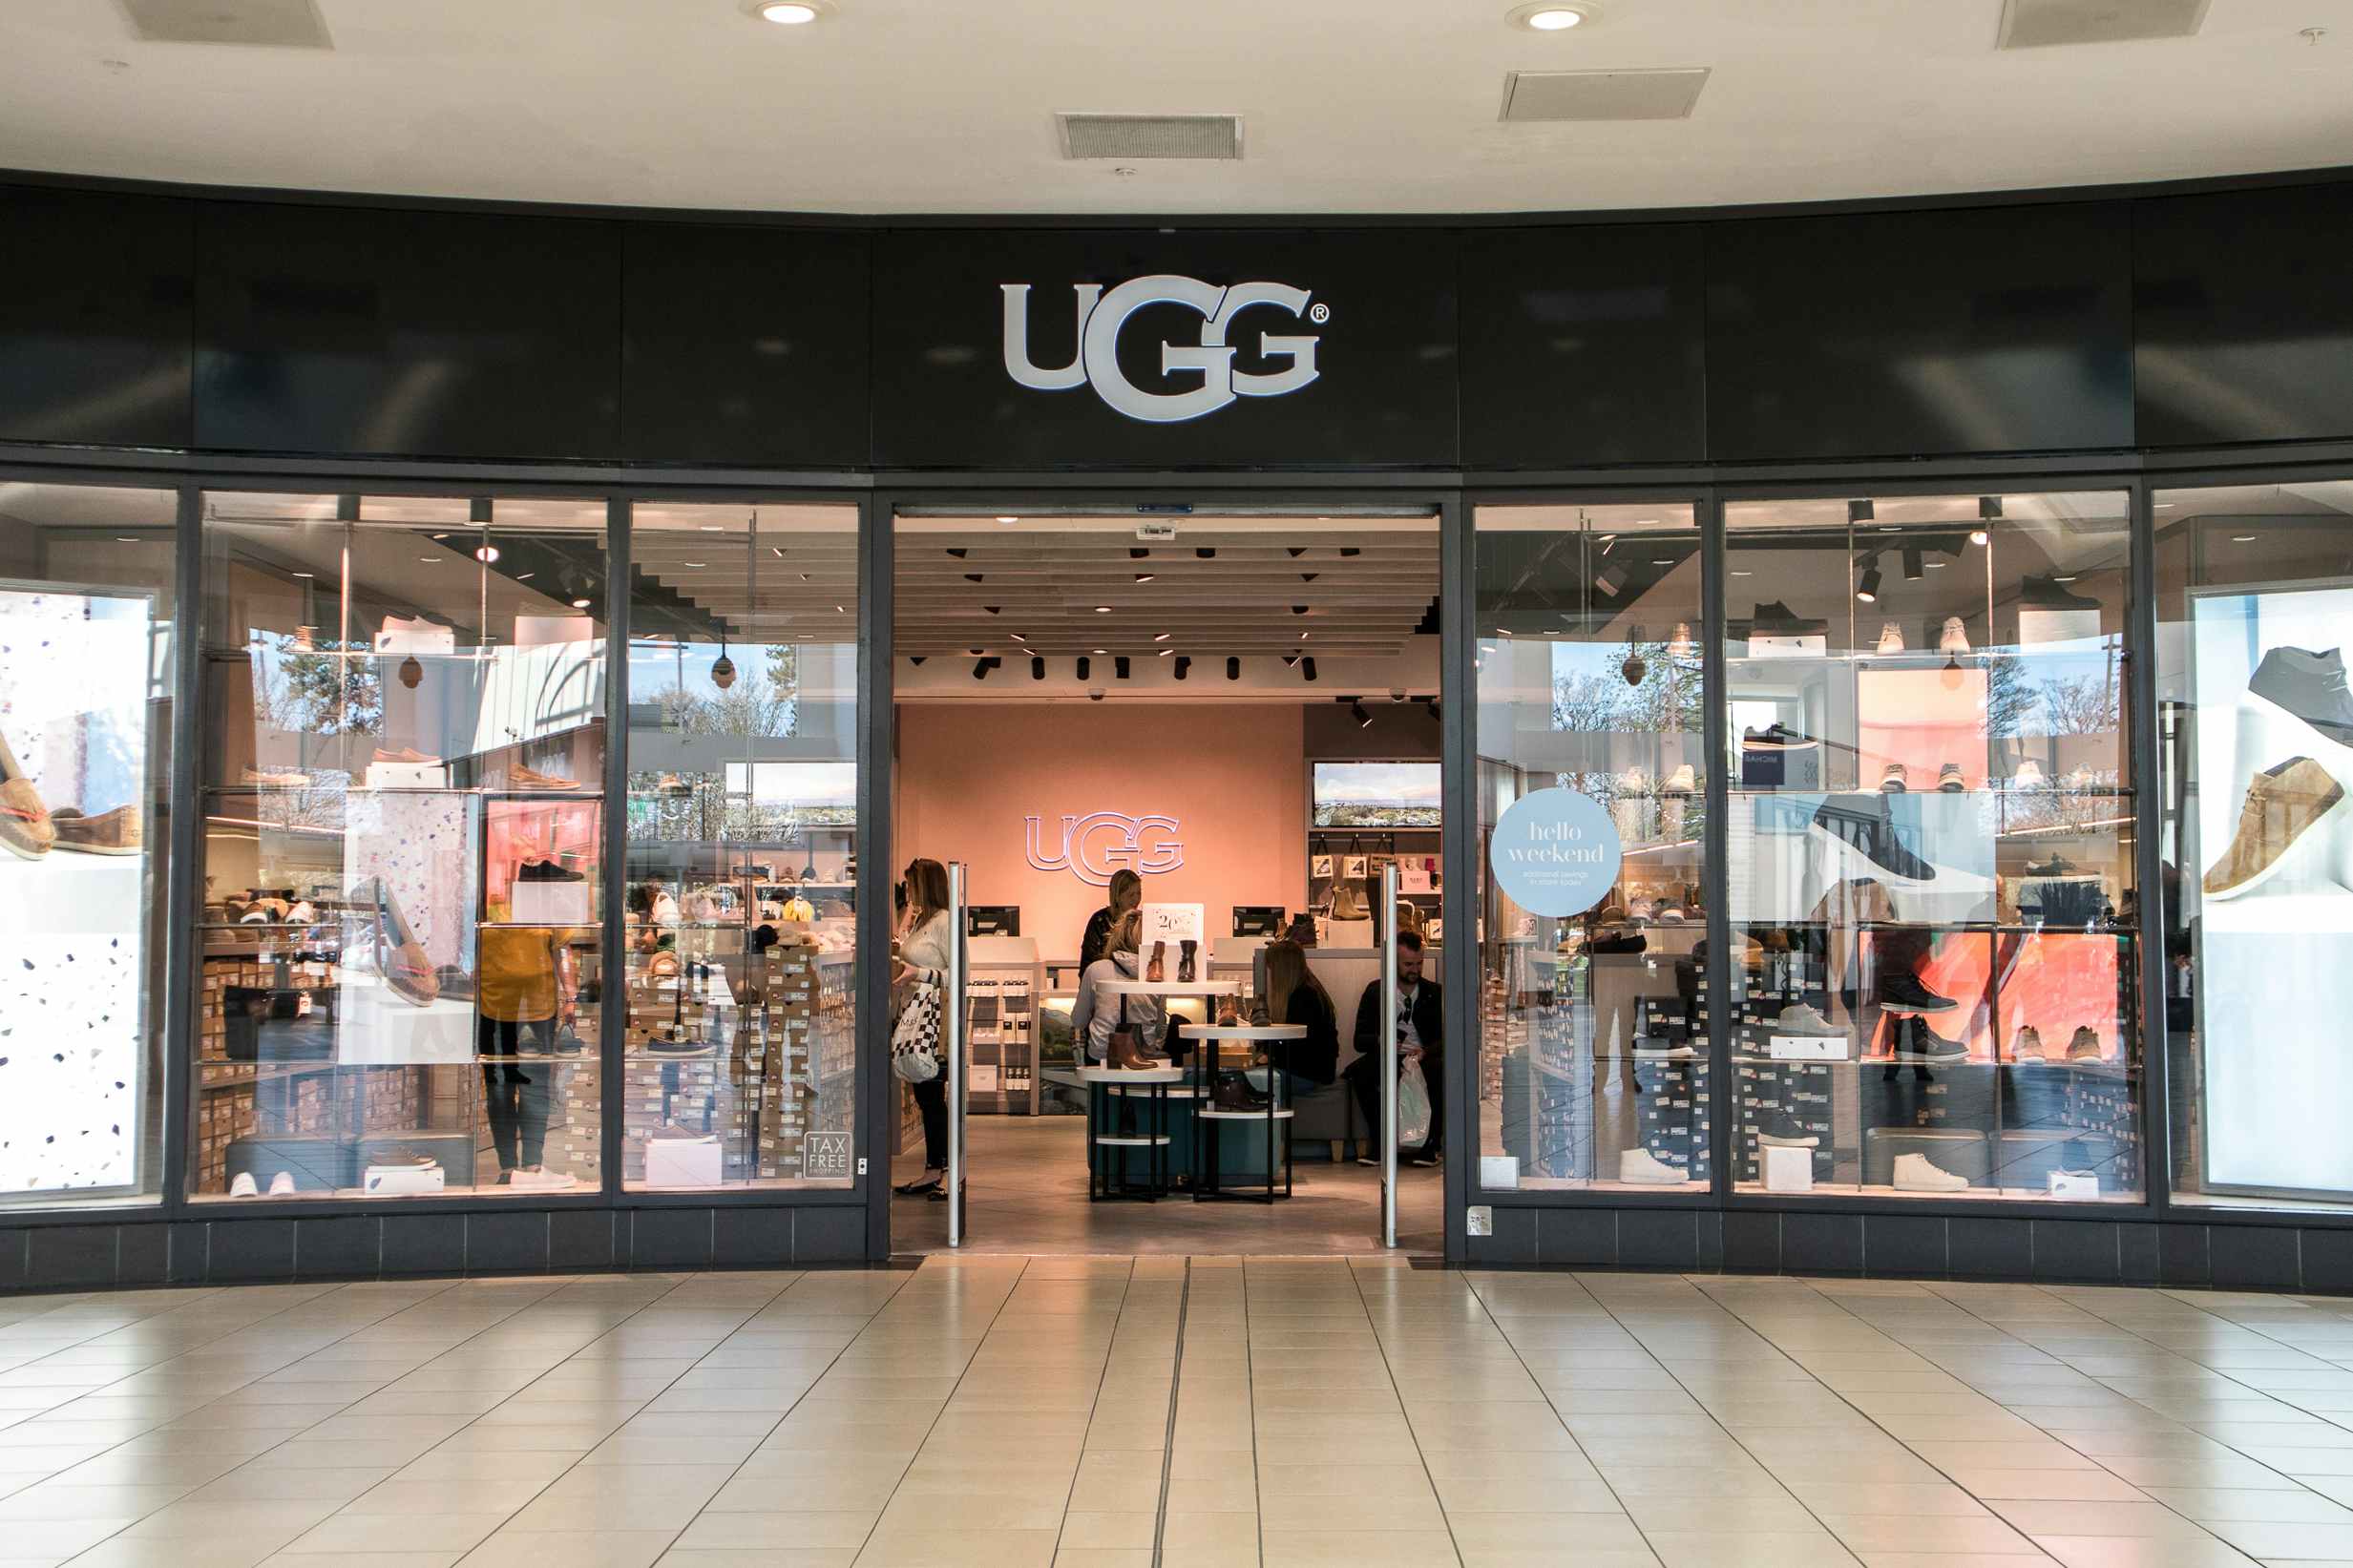 An UGG store entrance inside a mall.